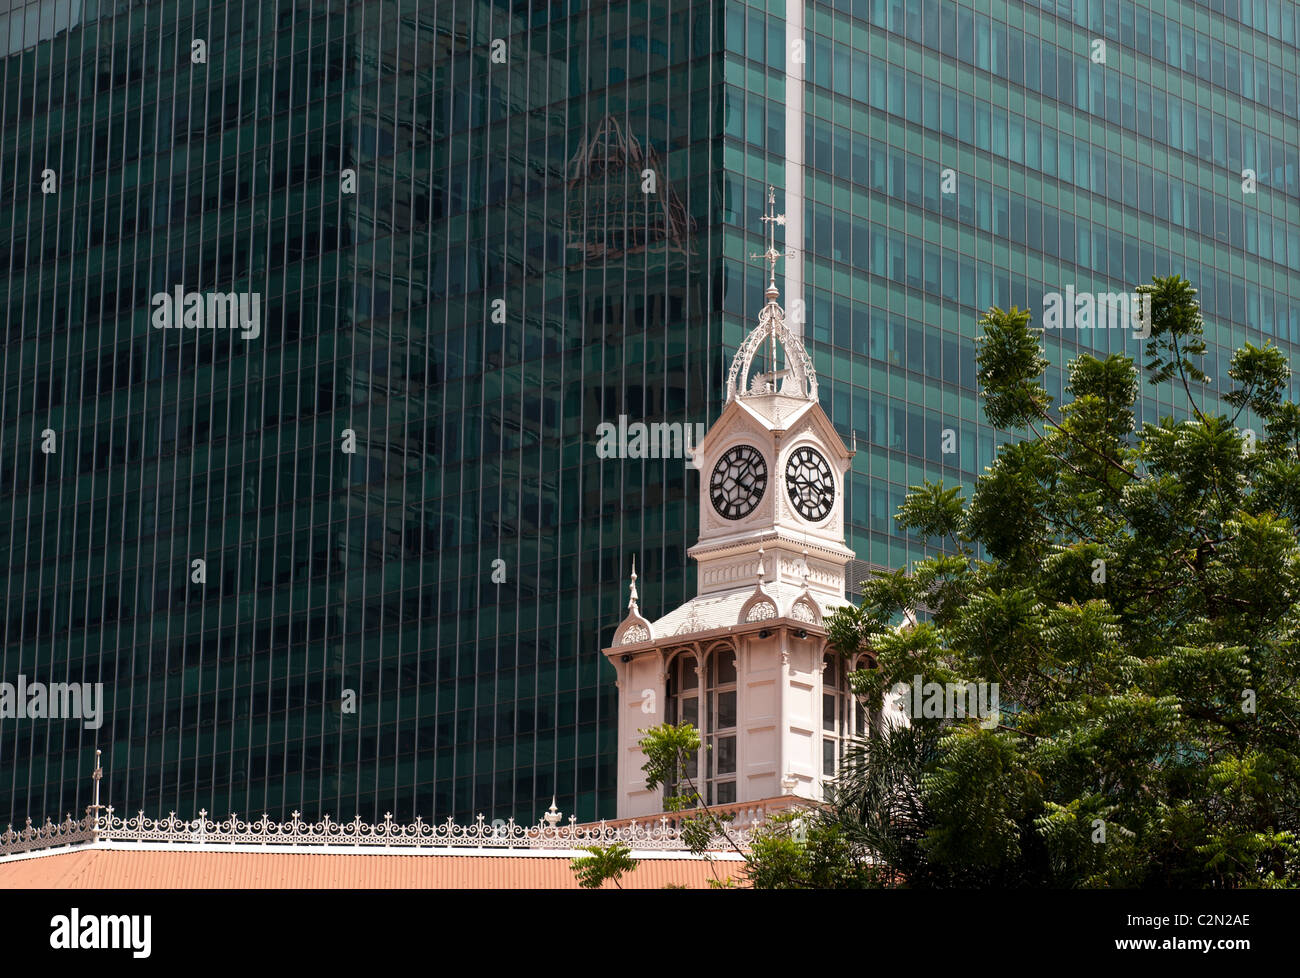 Clock tower of the Lau Pa Sat Market against the 'One Raffles Quay' south tower building, Singapore Stock Photo